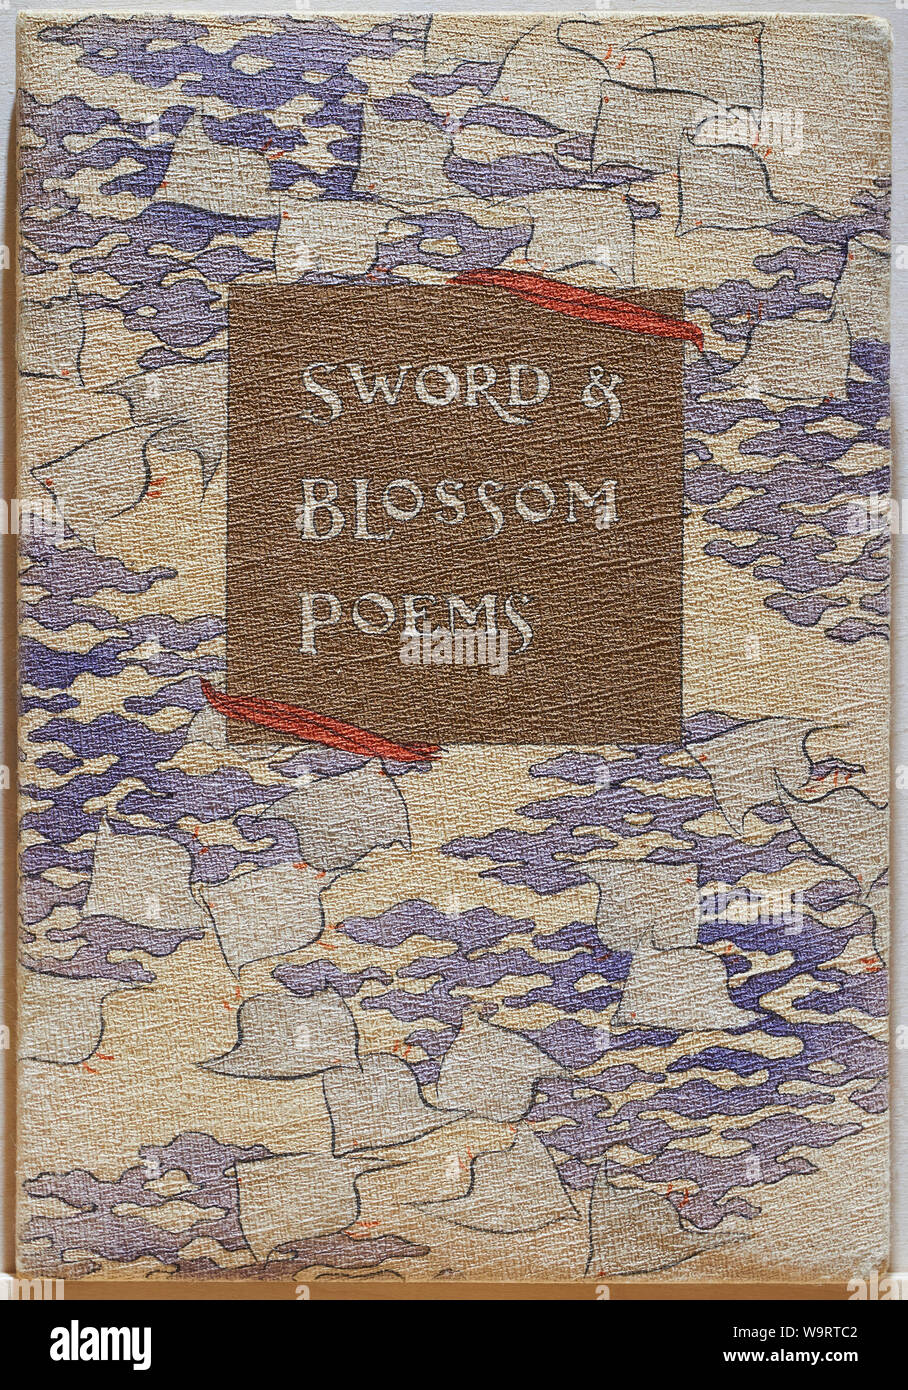 Japanese woodblock printed Sword & Blossom Poems book published by Hasegawa in the early 1900s (20th century). Stock Photo